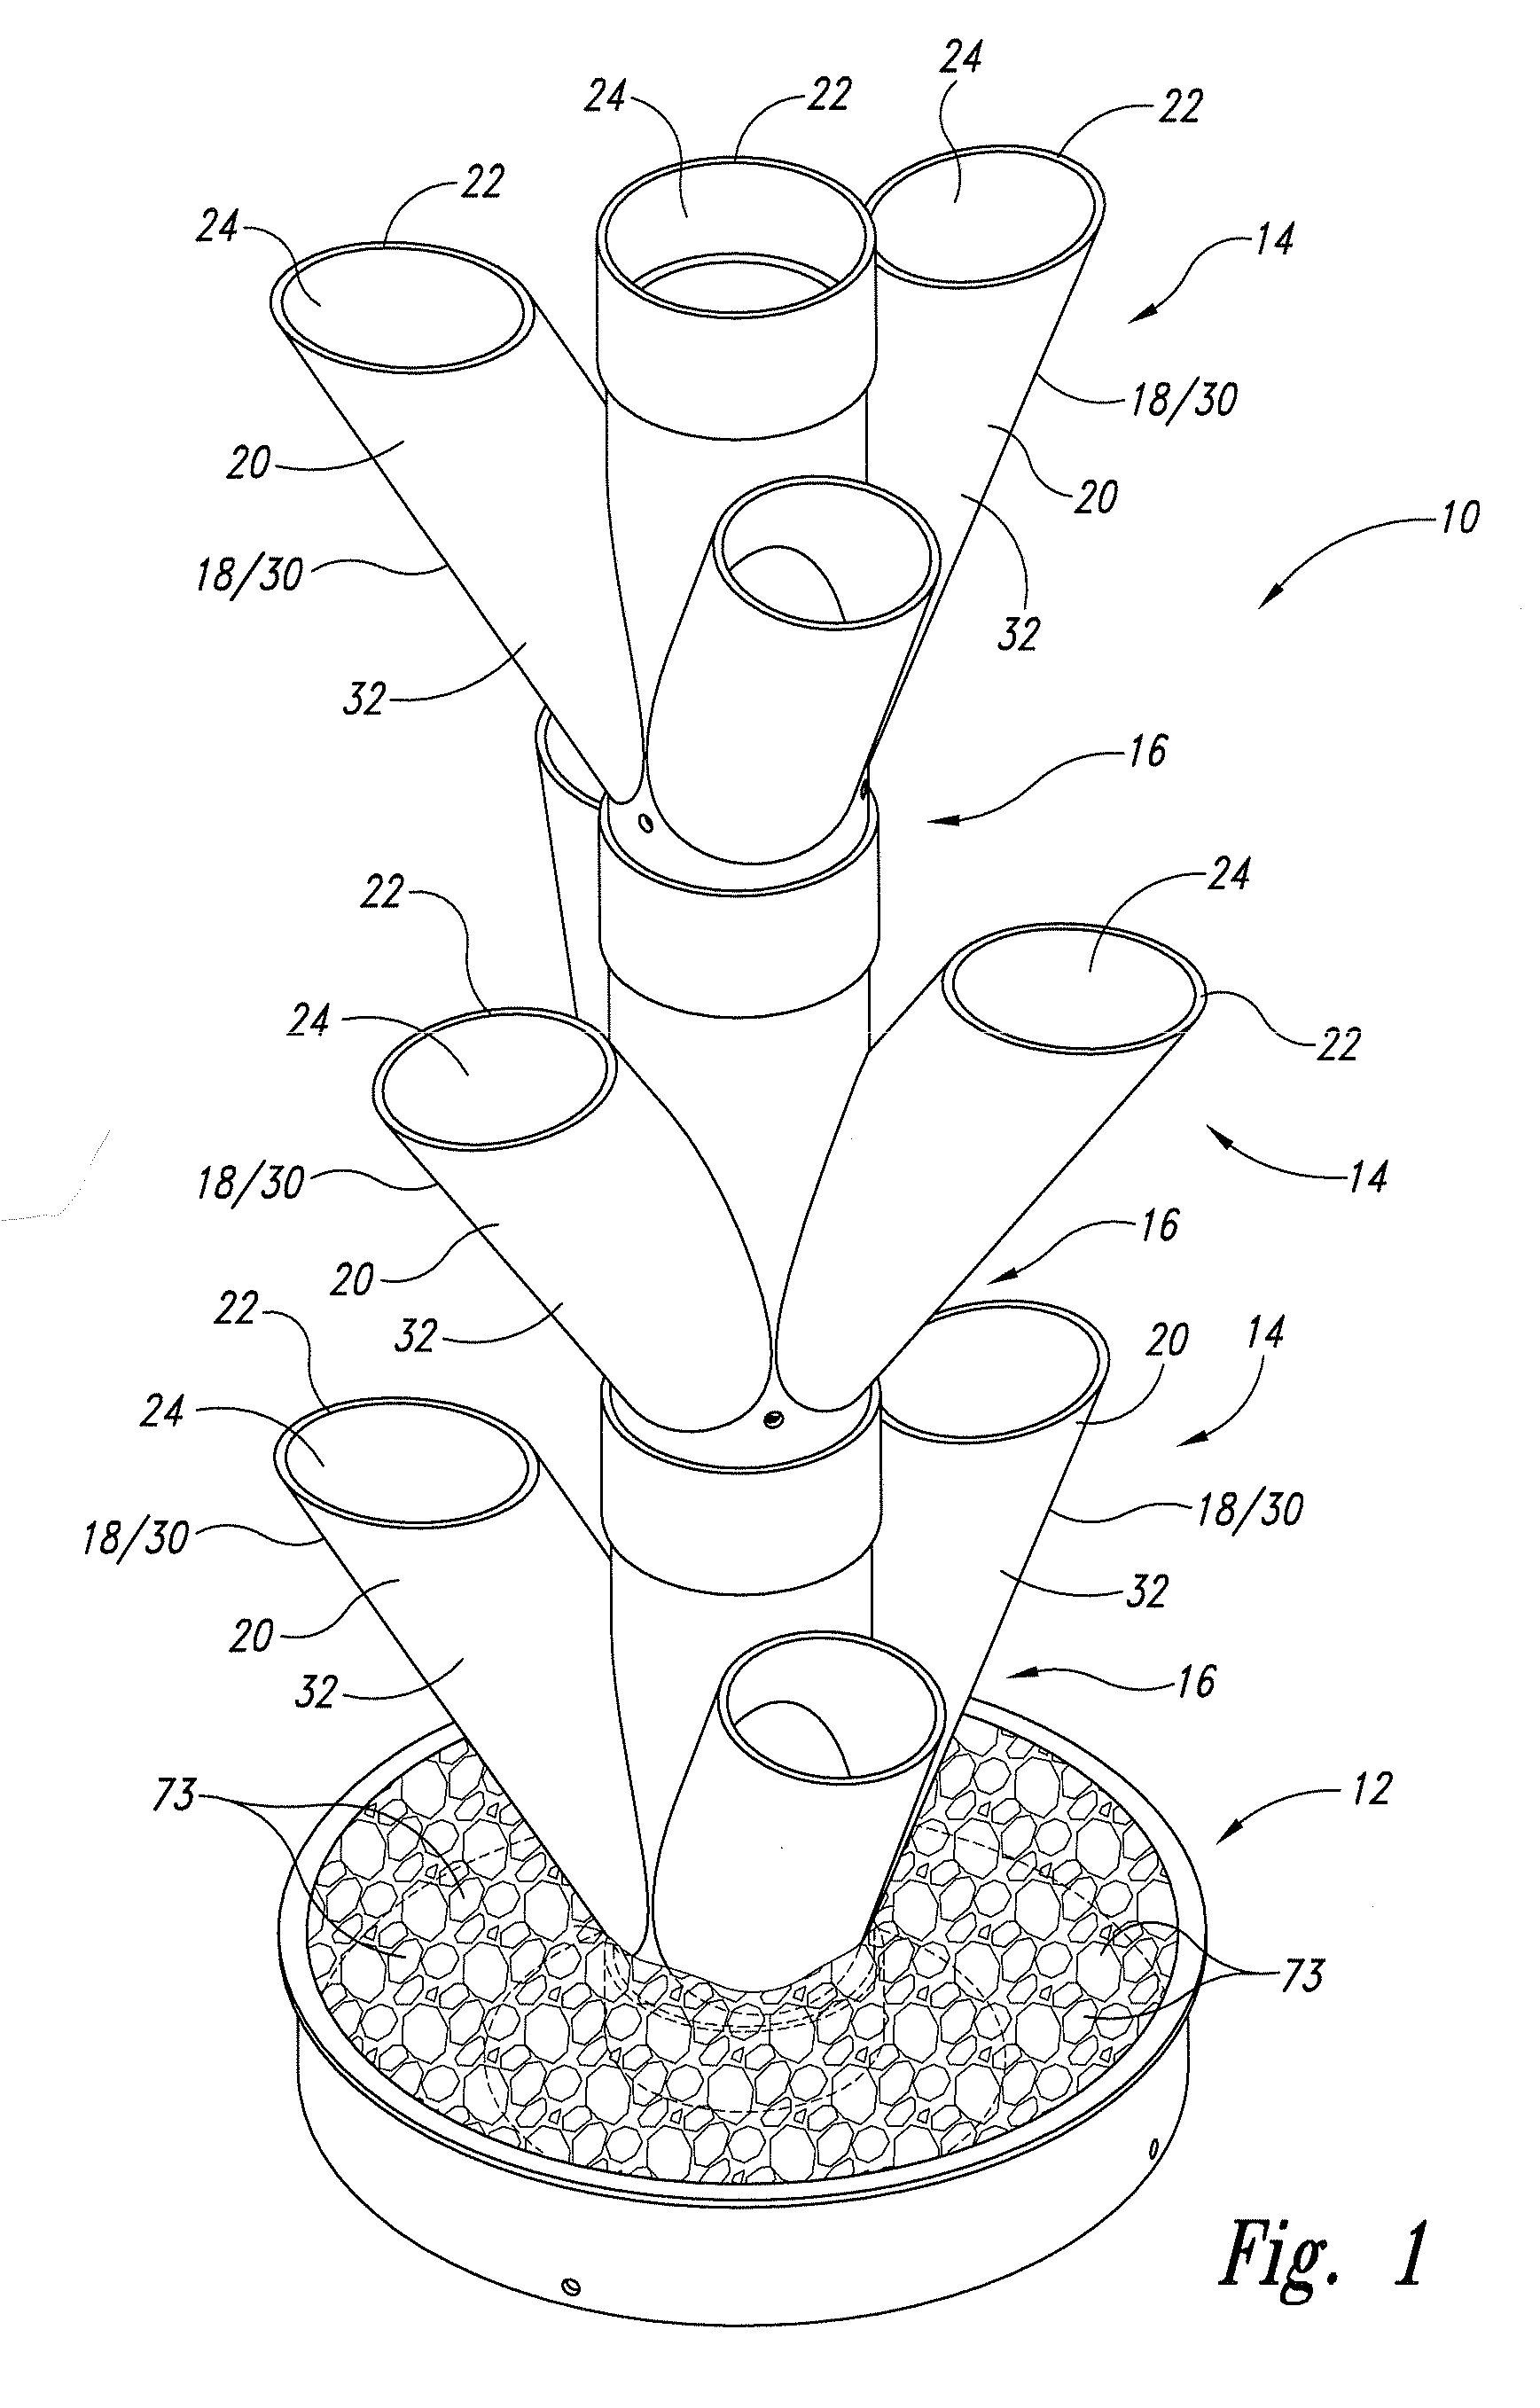 Eco-friendly vertical planter apparatus, system, and method